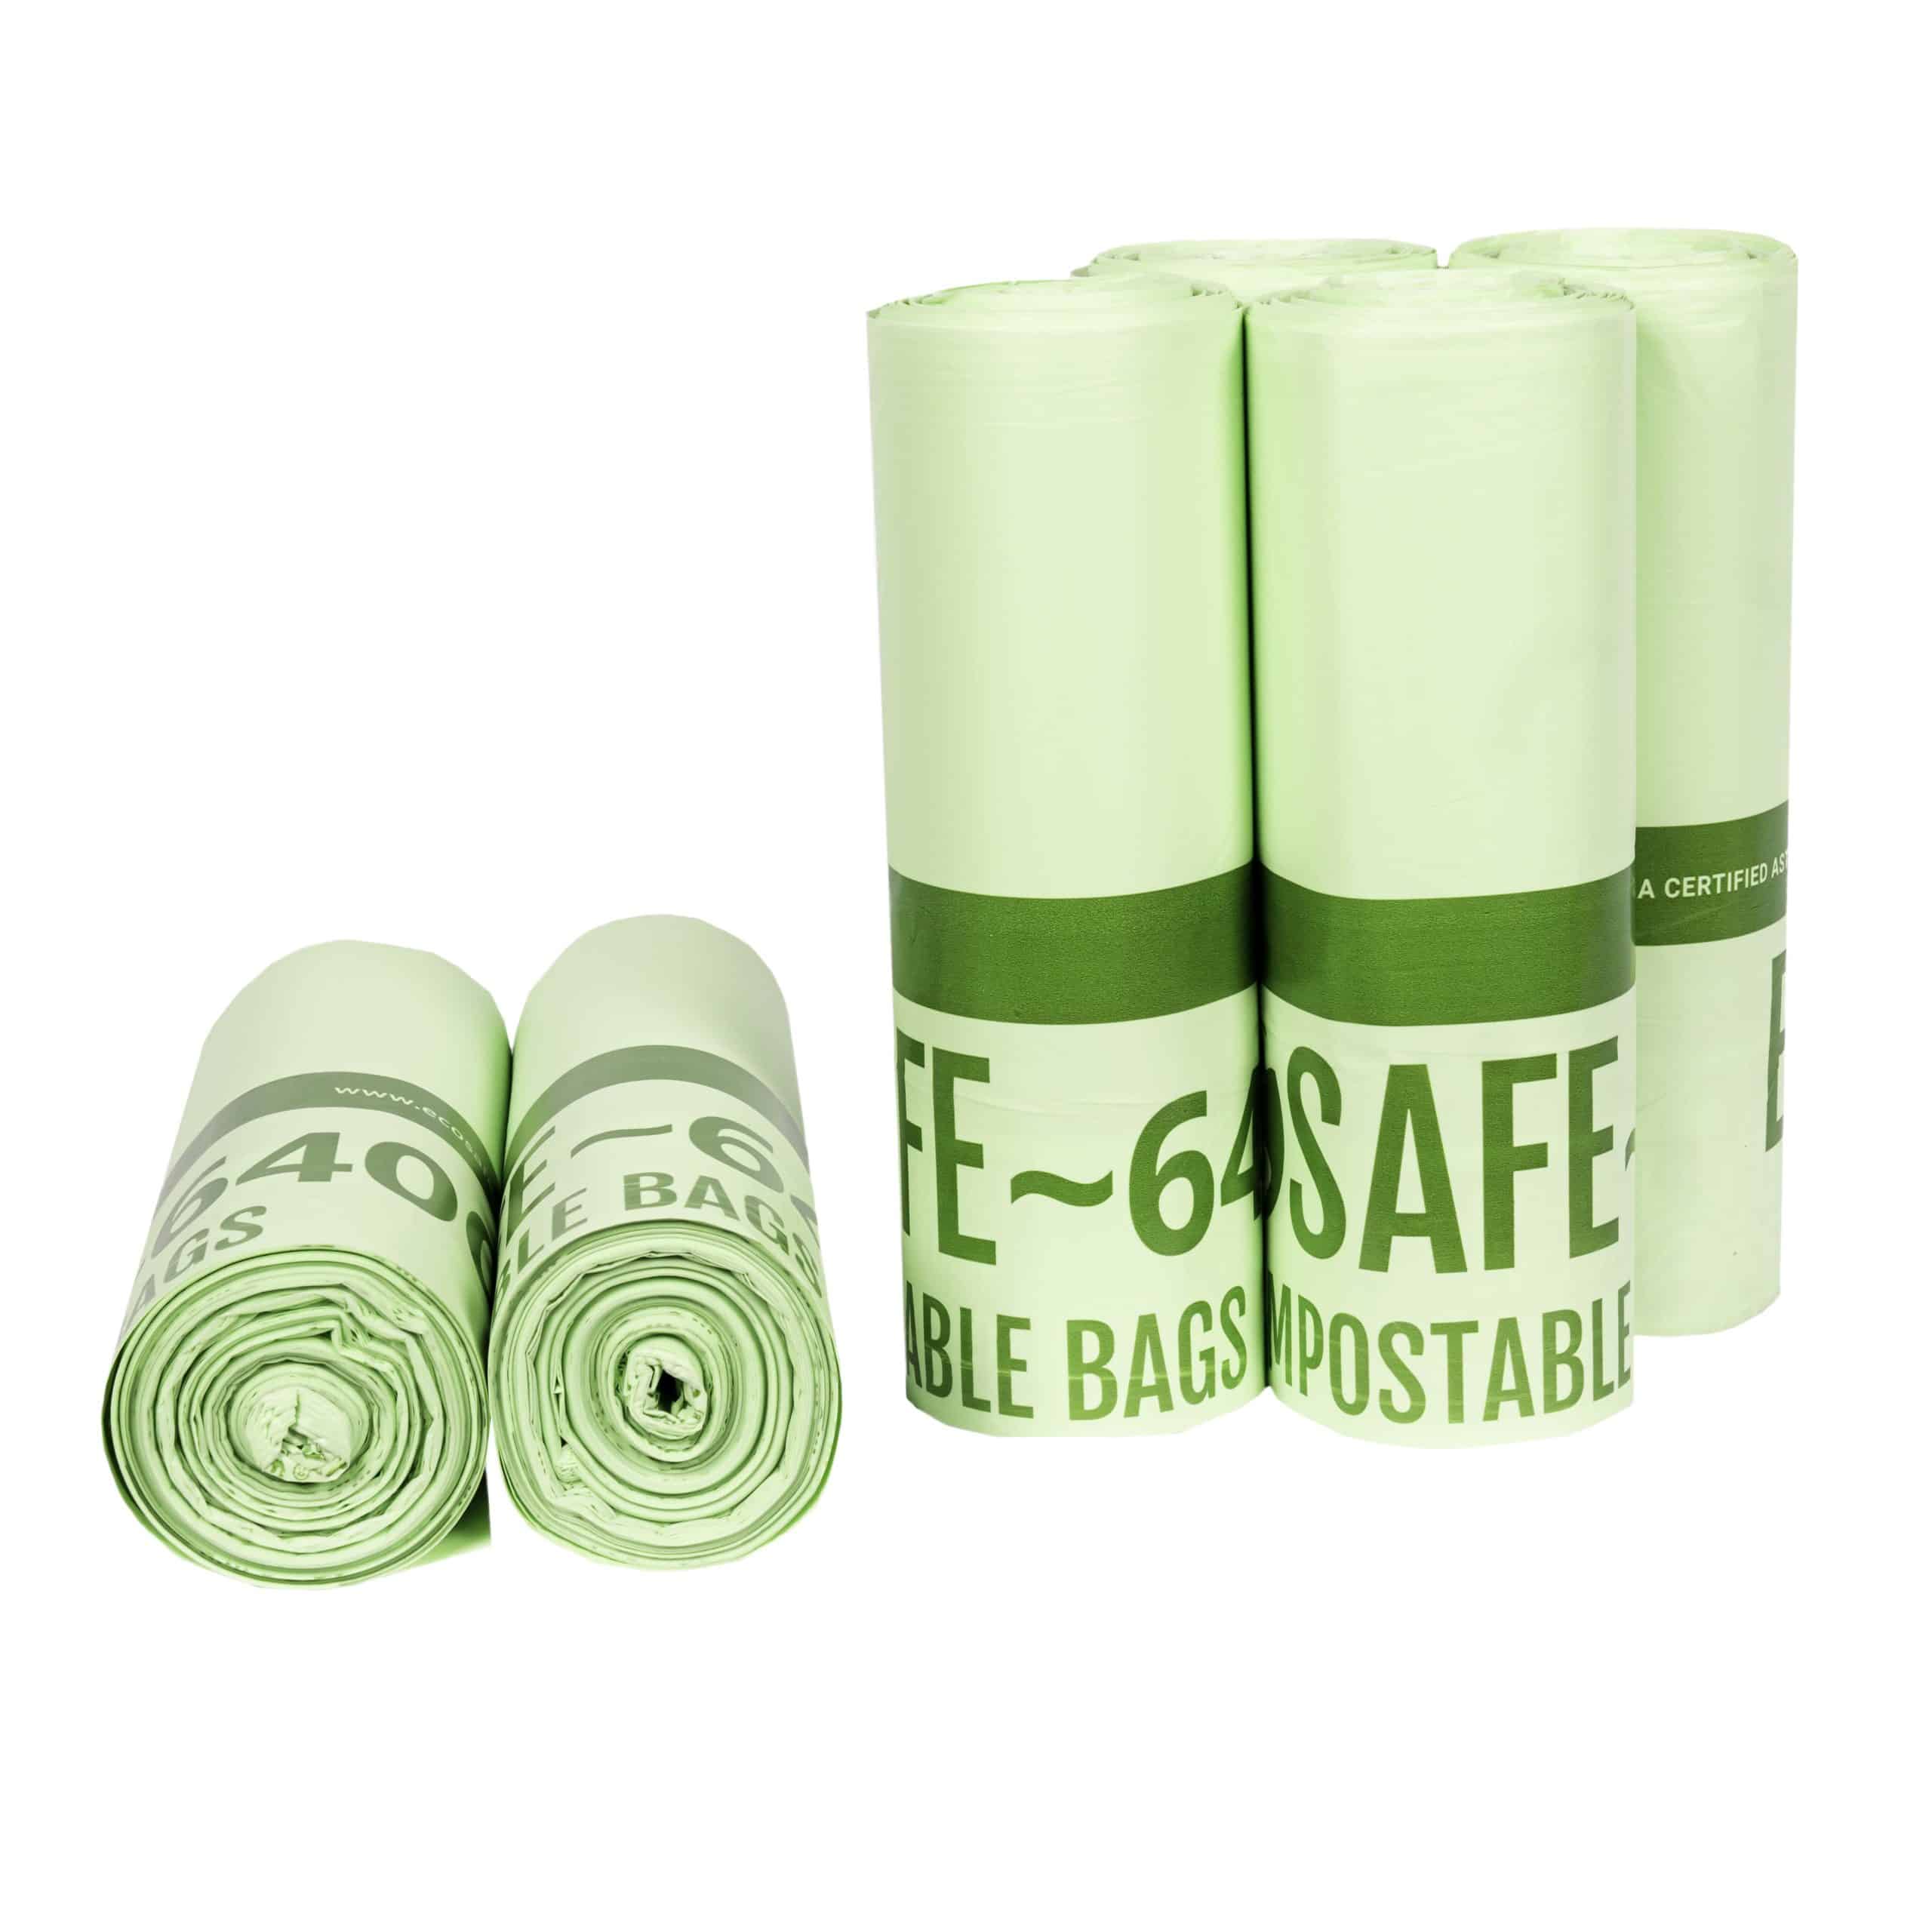 EcoSafe-Compostable-Bags-HB3550-85-Rolls-min